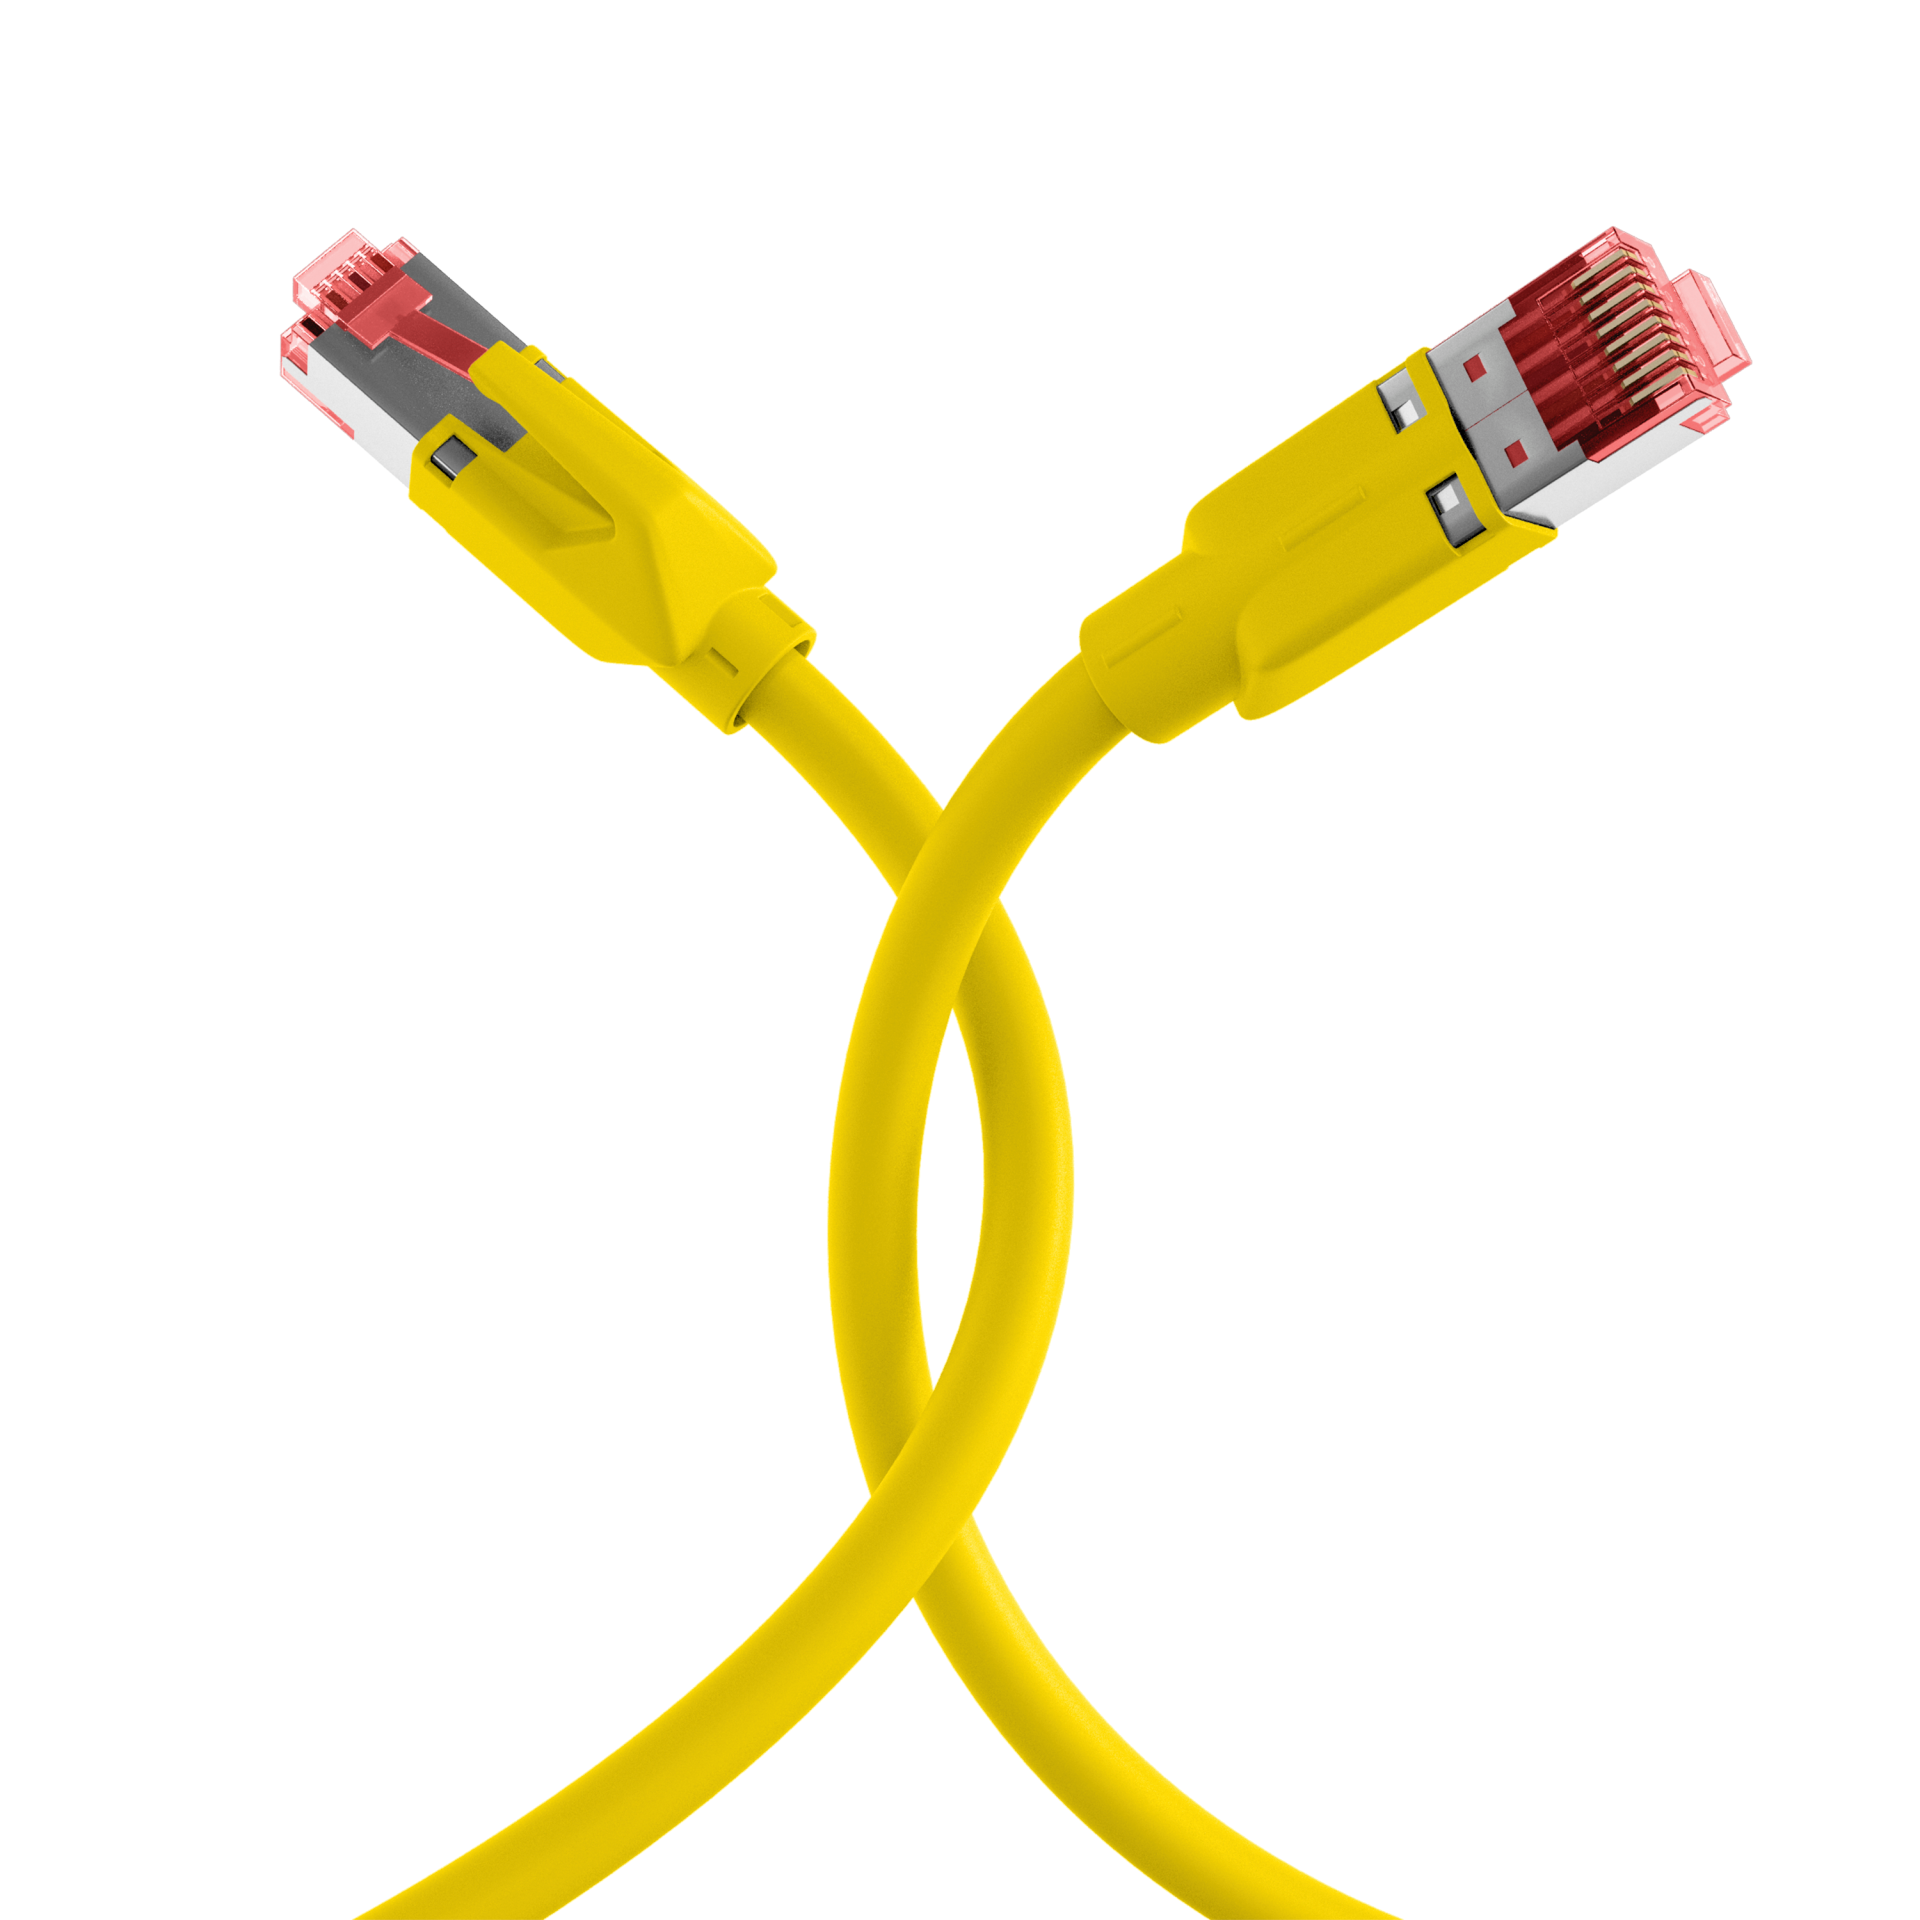 RJ45 Patch Cord Cat.5e SF/UTP PURTM21 for drag chains yellow 2m